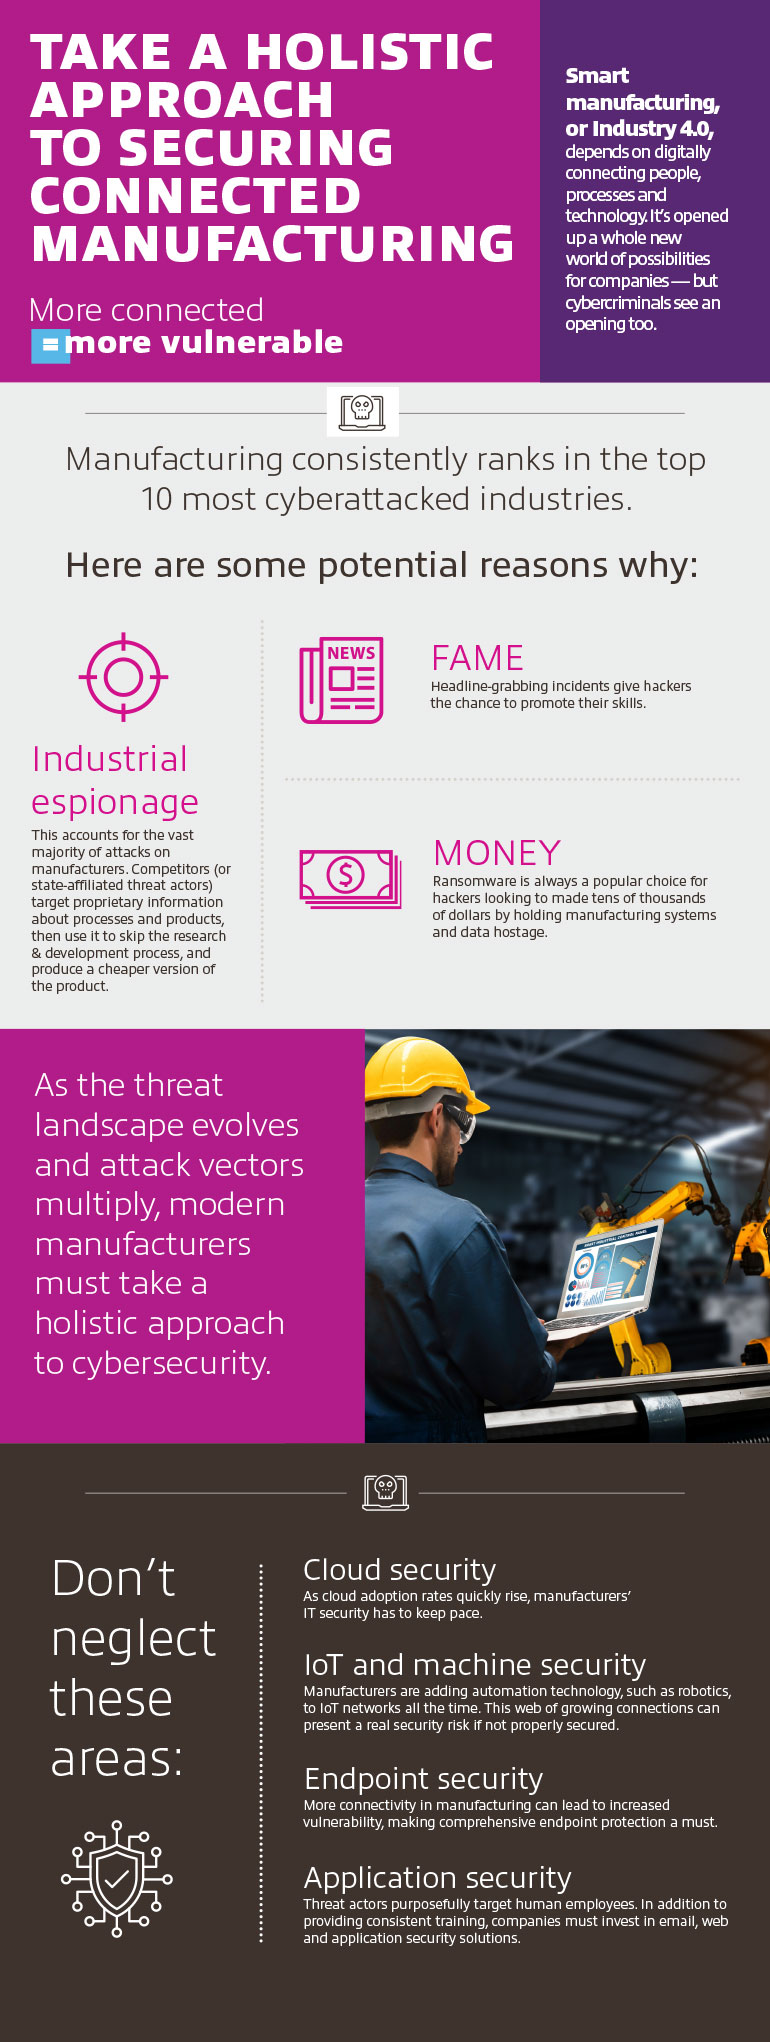 Holistic Approach to Securing Manufacturing infographic